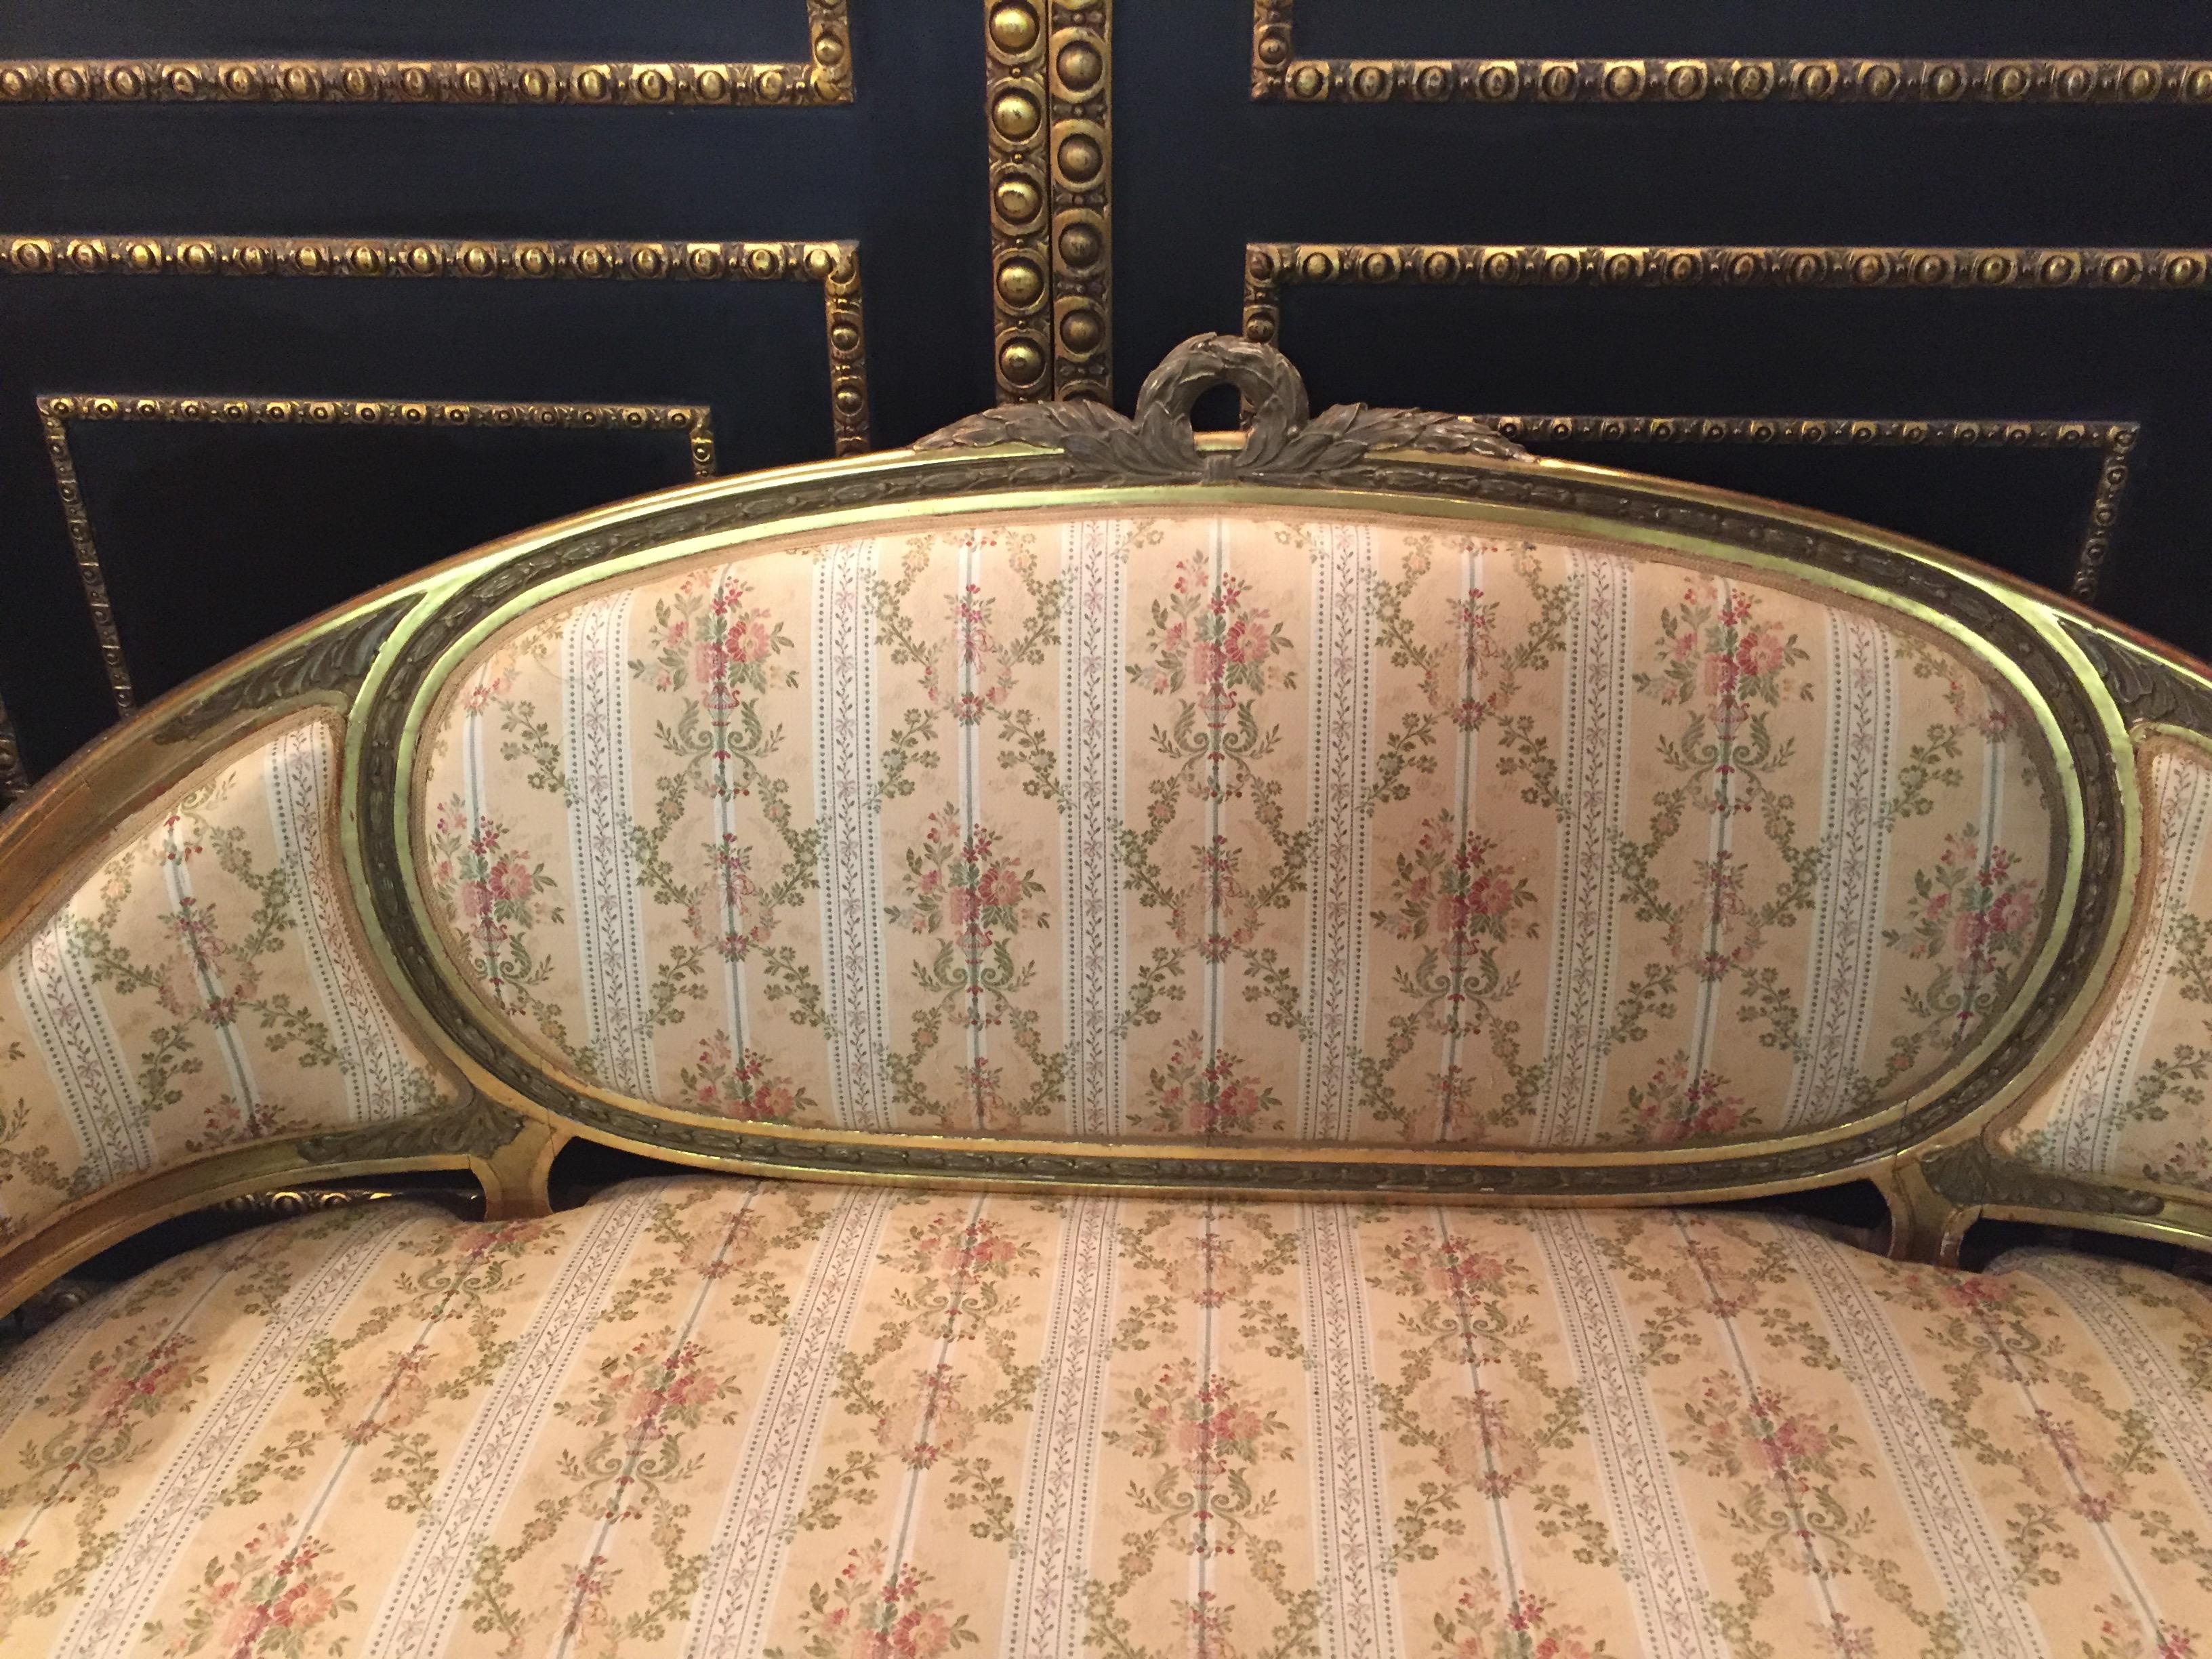 Hand-Carved 19th Century Sofa in Louis XVI Style, Solid Beechwood Poliment Gilded